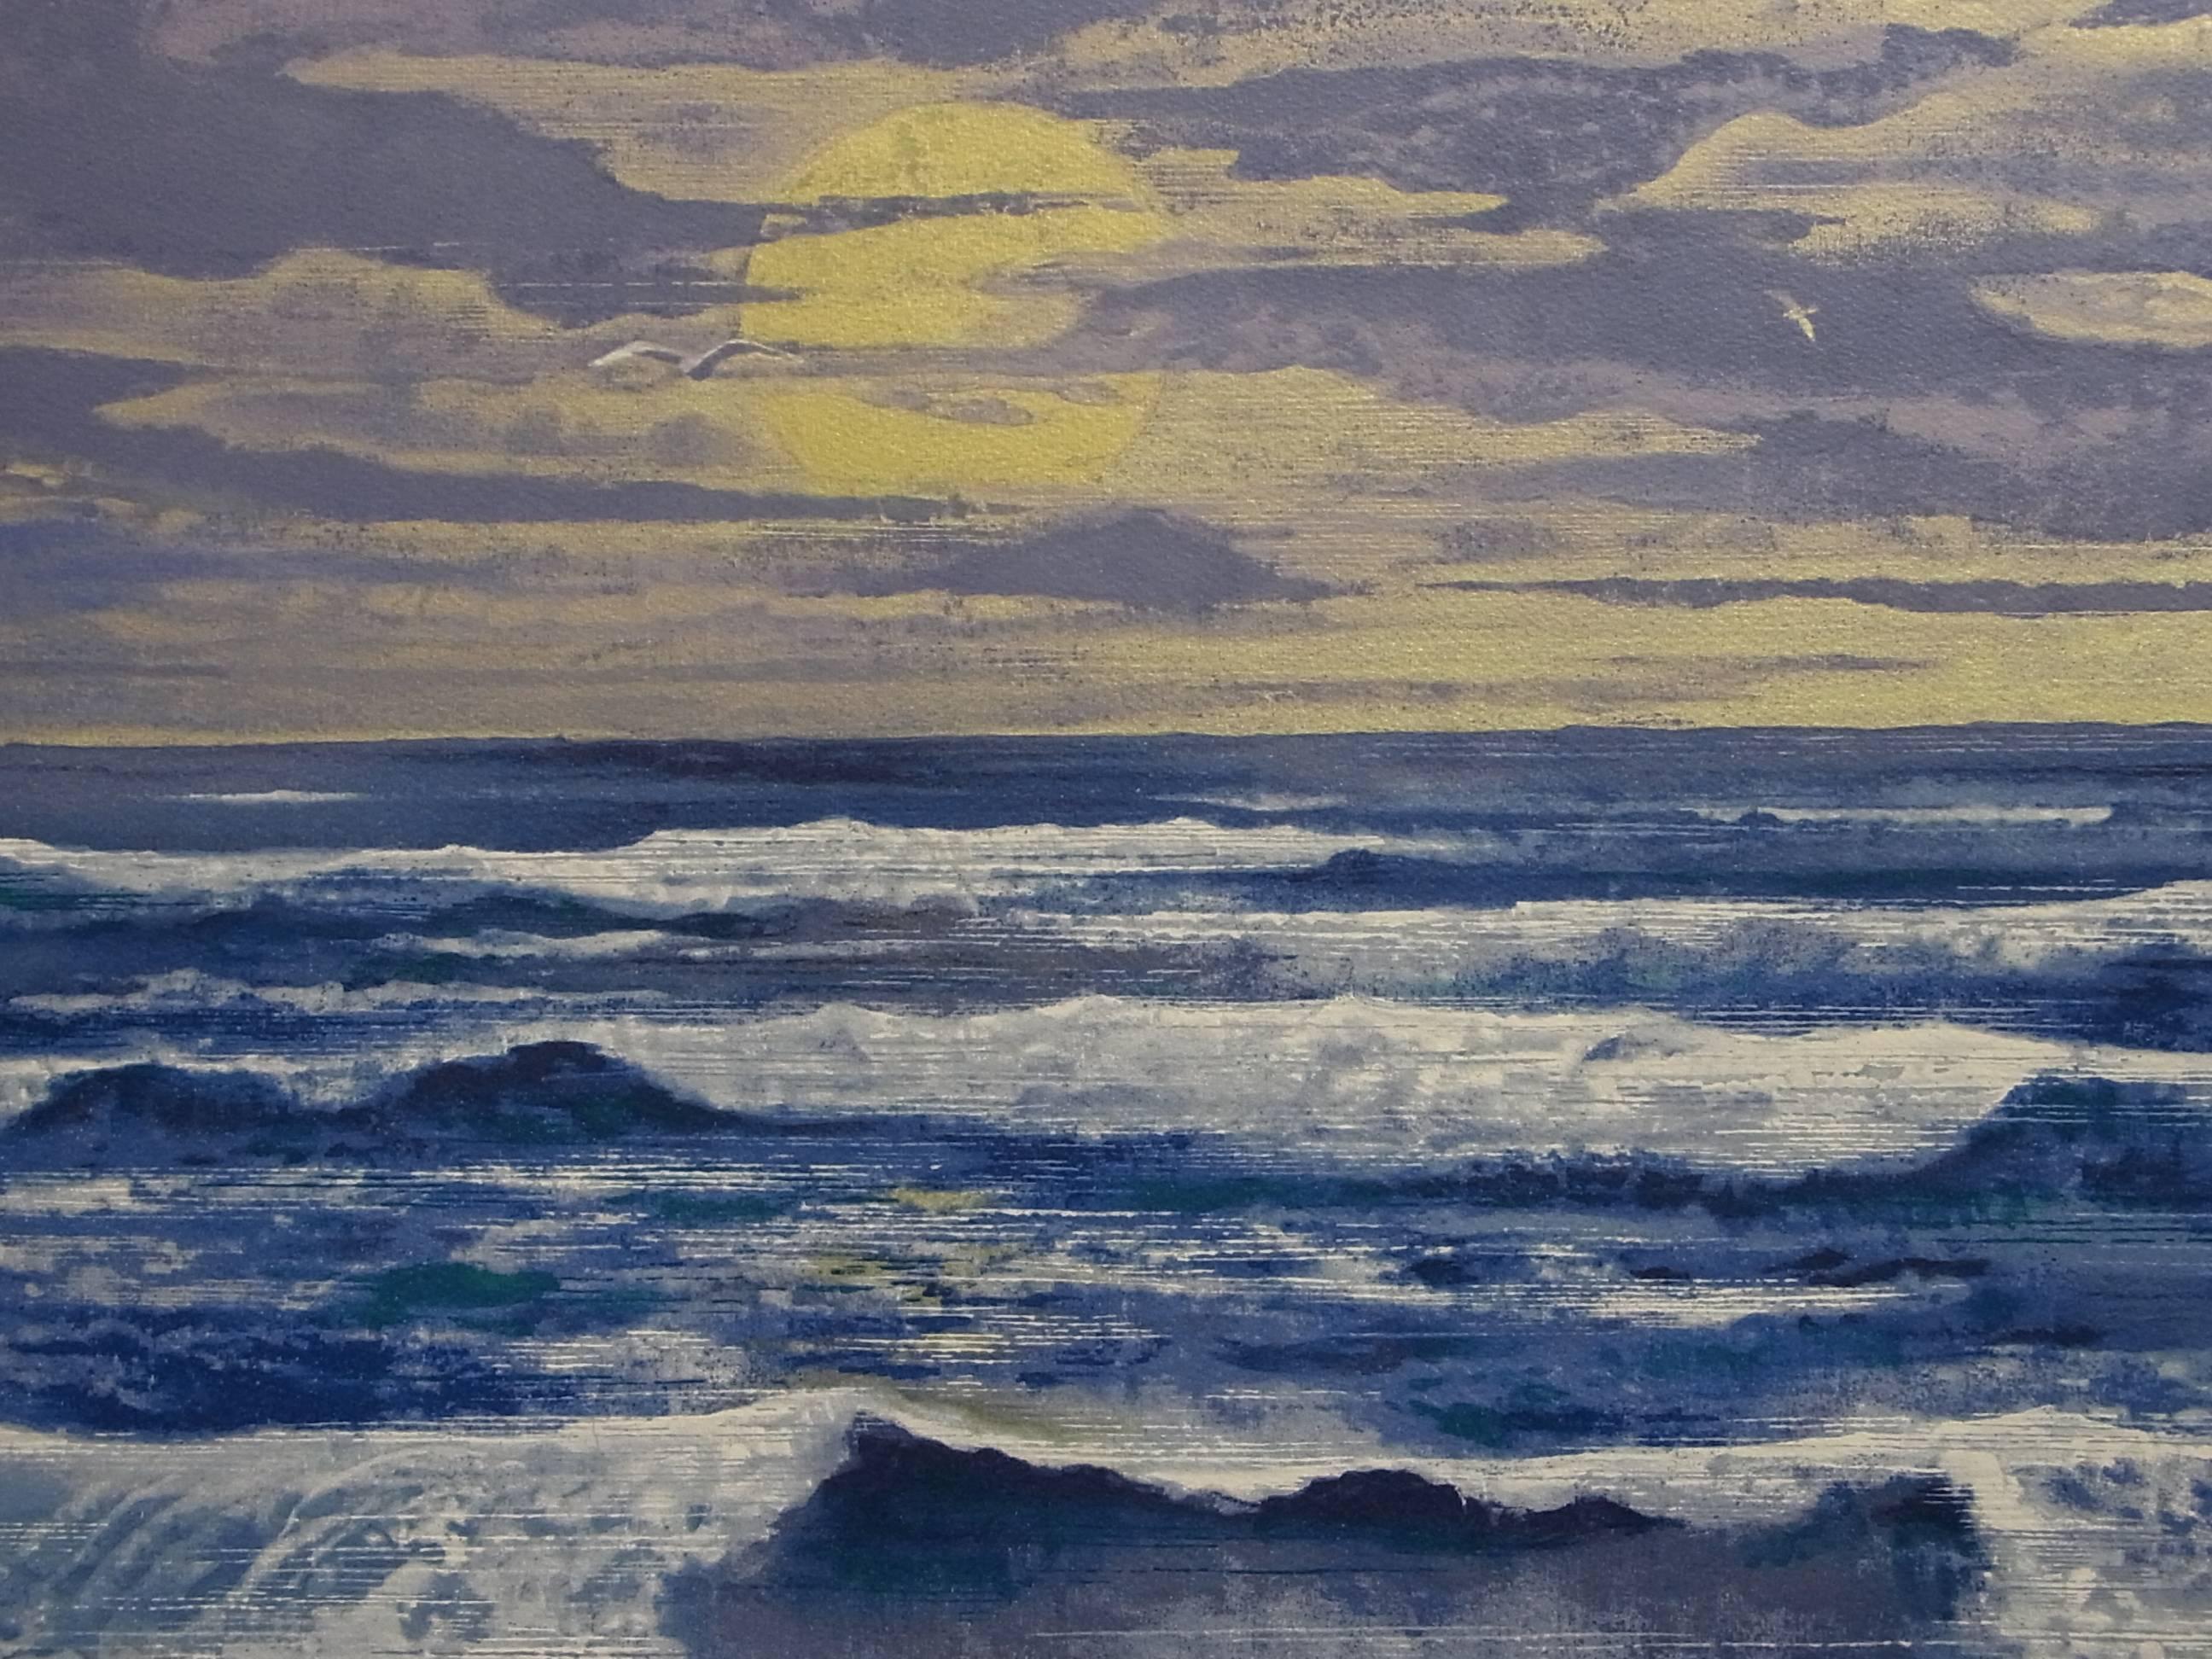 Color lithograph by Sumio Goto (1930-2016 ), Japanese painter.
Sunrise in the Pacific Ocean, circa 1997.
Signed, stamped, numbered 65/100.
Not framed.
Excellent condition

Biography:
1930: Born in a Shingon Temple in Chiba Prefecture.
1952: Awarded